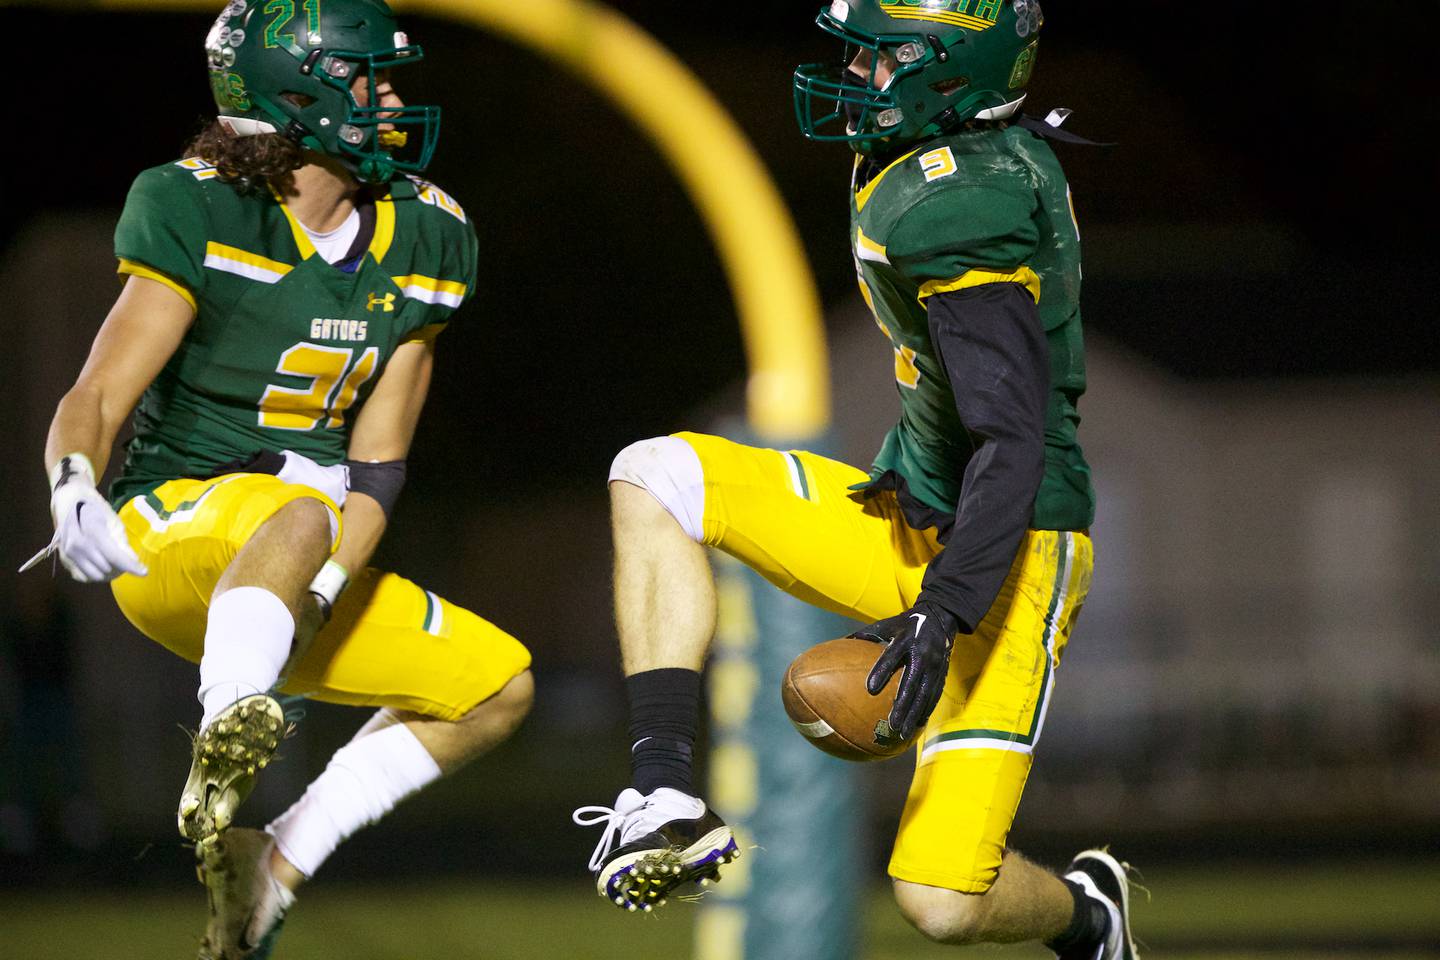 Crystal Lake South's Michael Prokos (21) and Colton Hess (3) celebrate a touchdown against Crystal Lake Central on Friday Sept.30,2022 in Crystal Lake.